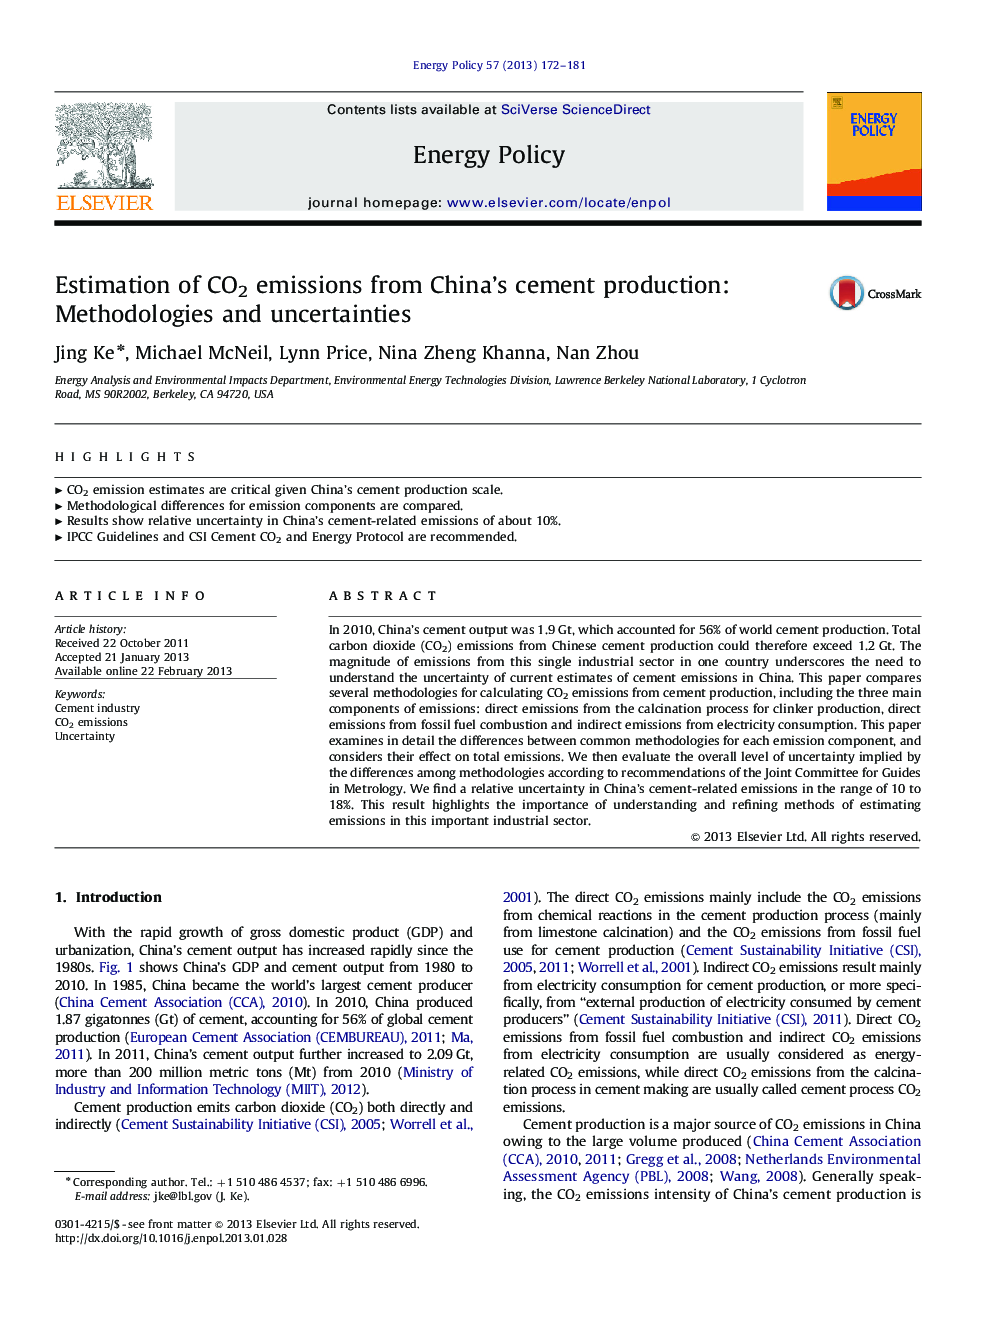 Estimation of CO2 emissions from China’s cement production: Methodologies and uncertainties